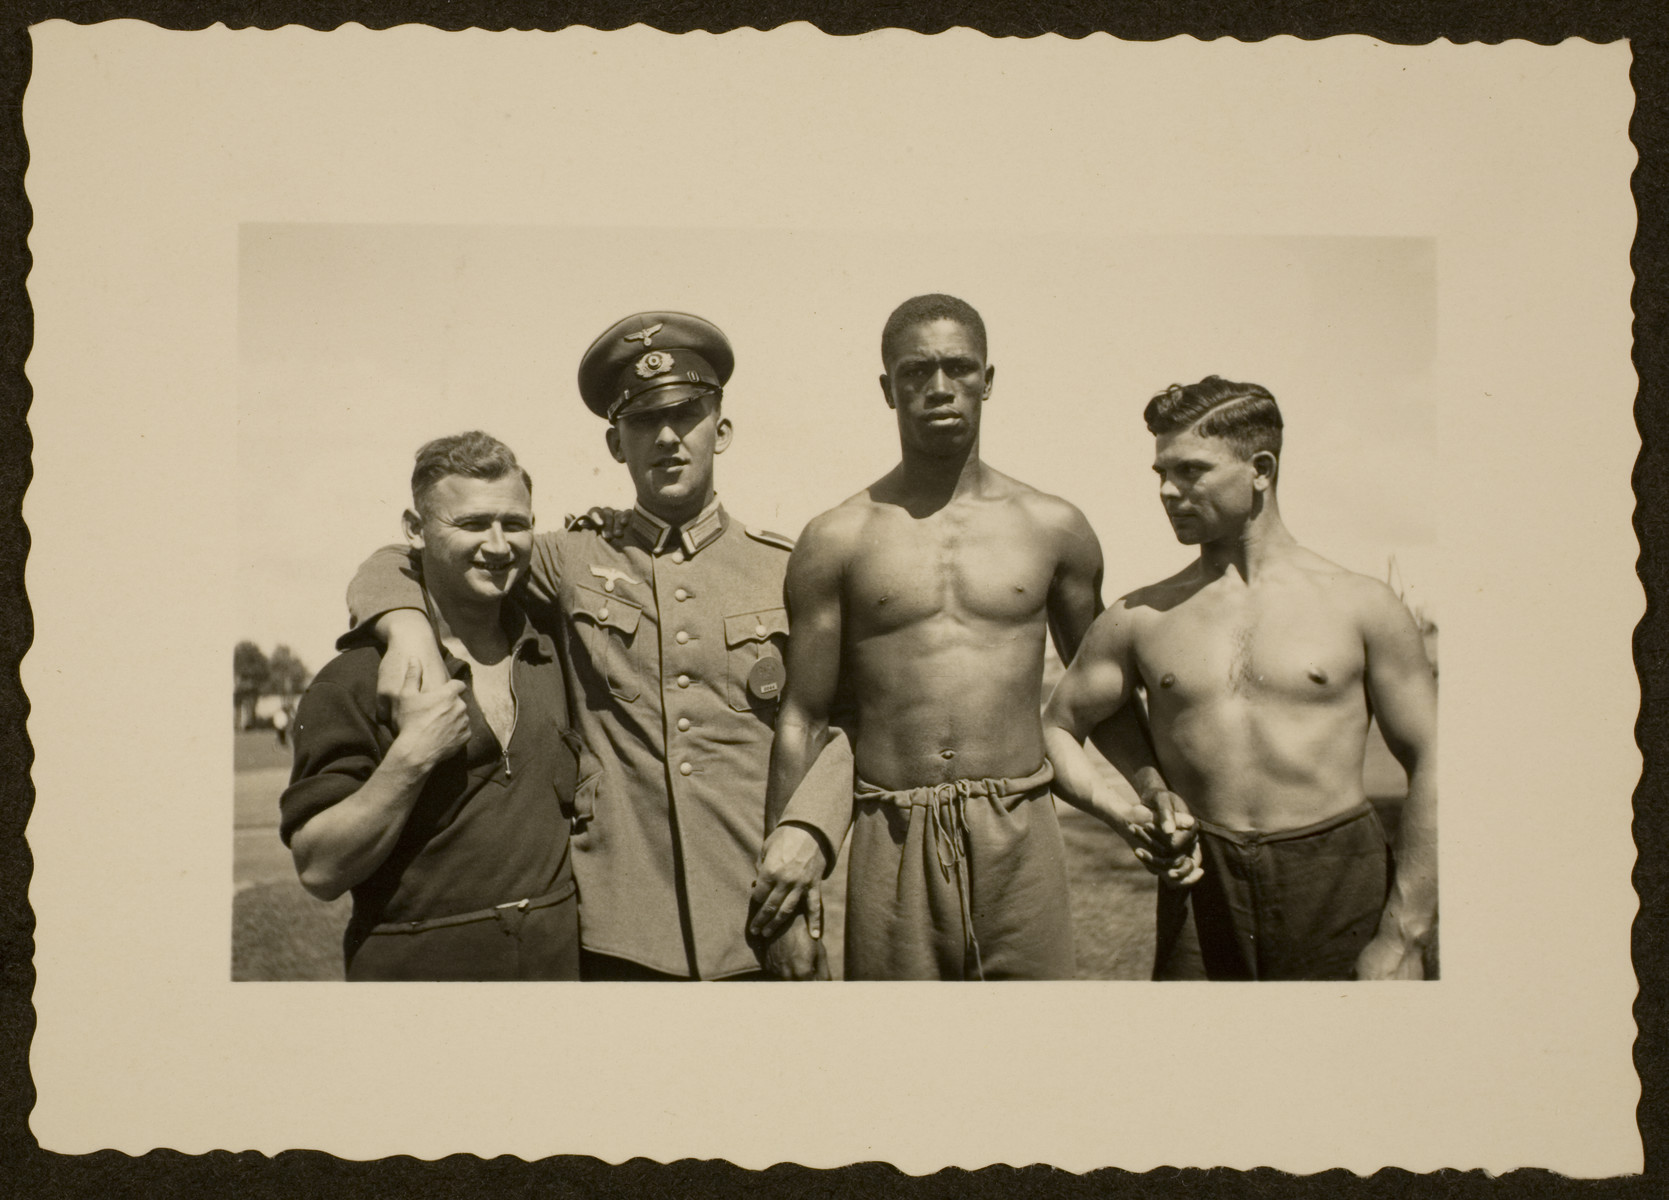 A German in an Army uniform poses with Olympic athletes.

Pictured second from the right is American track and field athlete John Woodruff.  Fritz Bezzelt (father of the donor) is pictured on the far right.